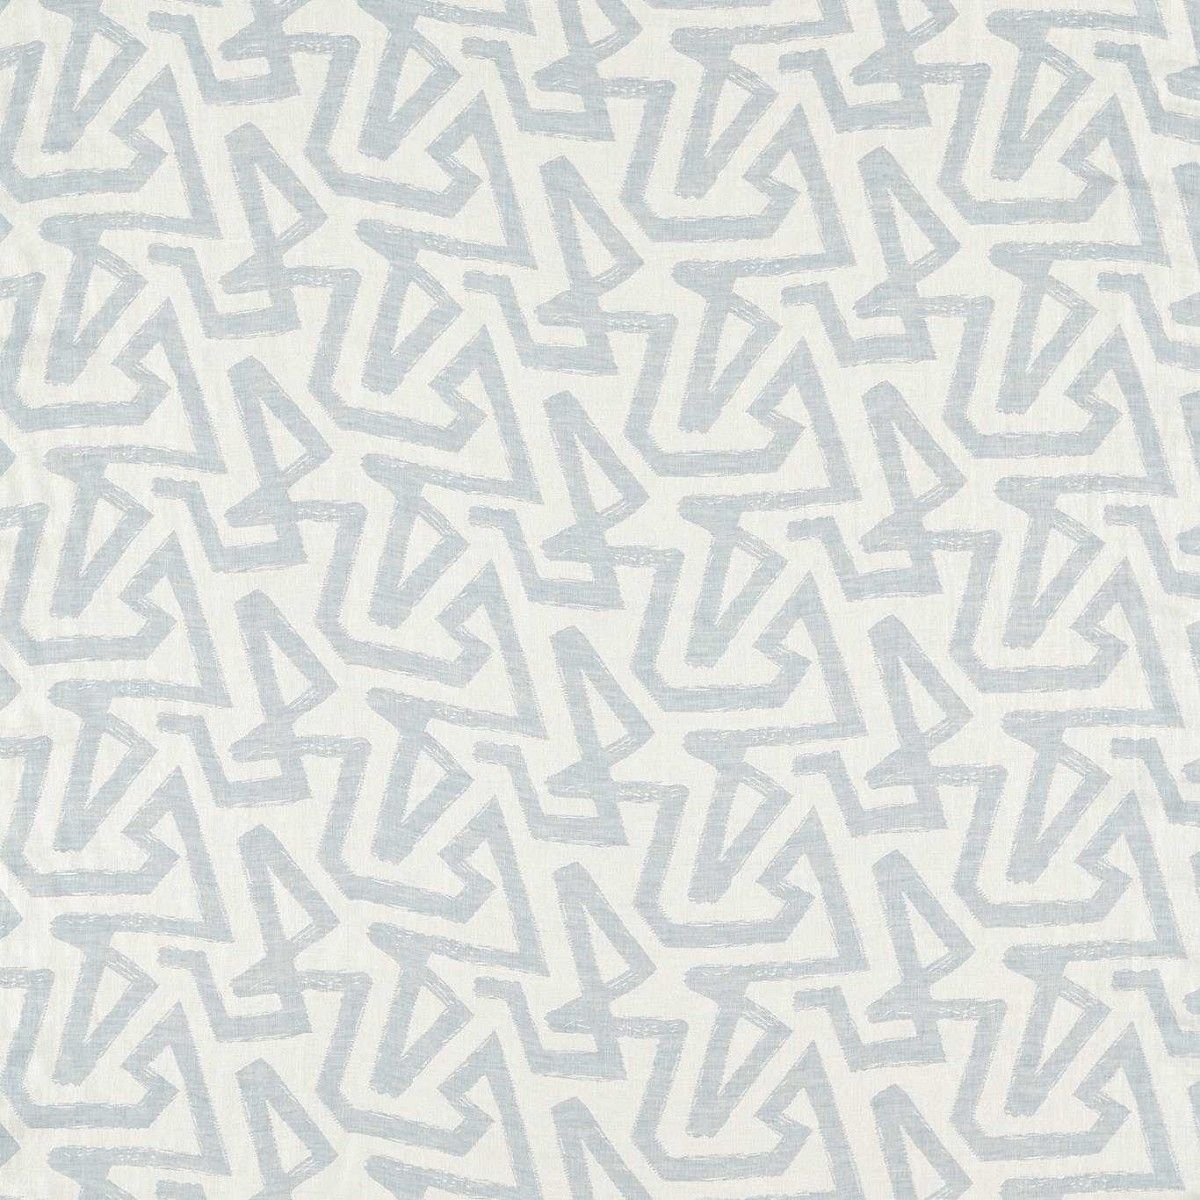 Izumi Exhale/Soft Focus Fabric by Harlequin